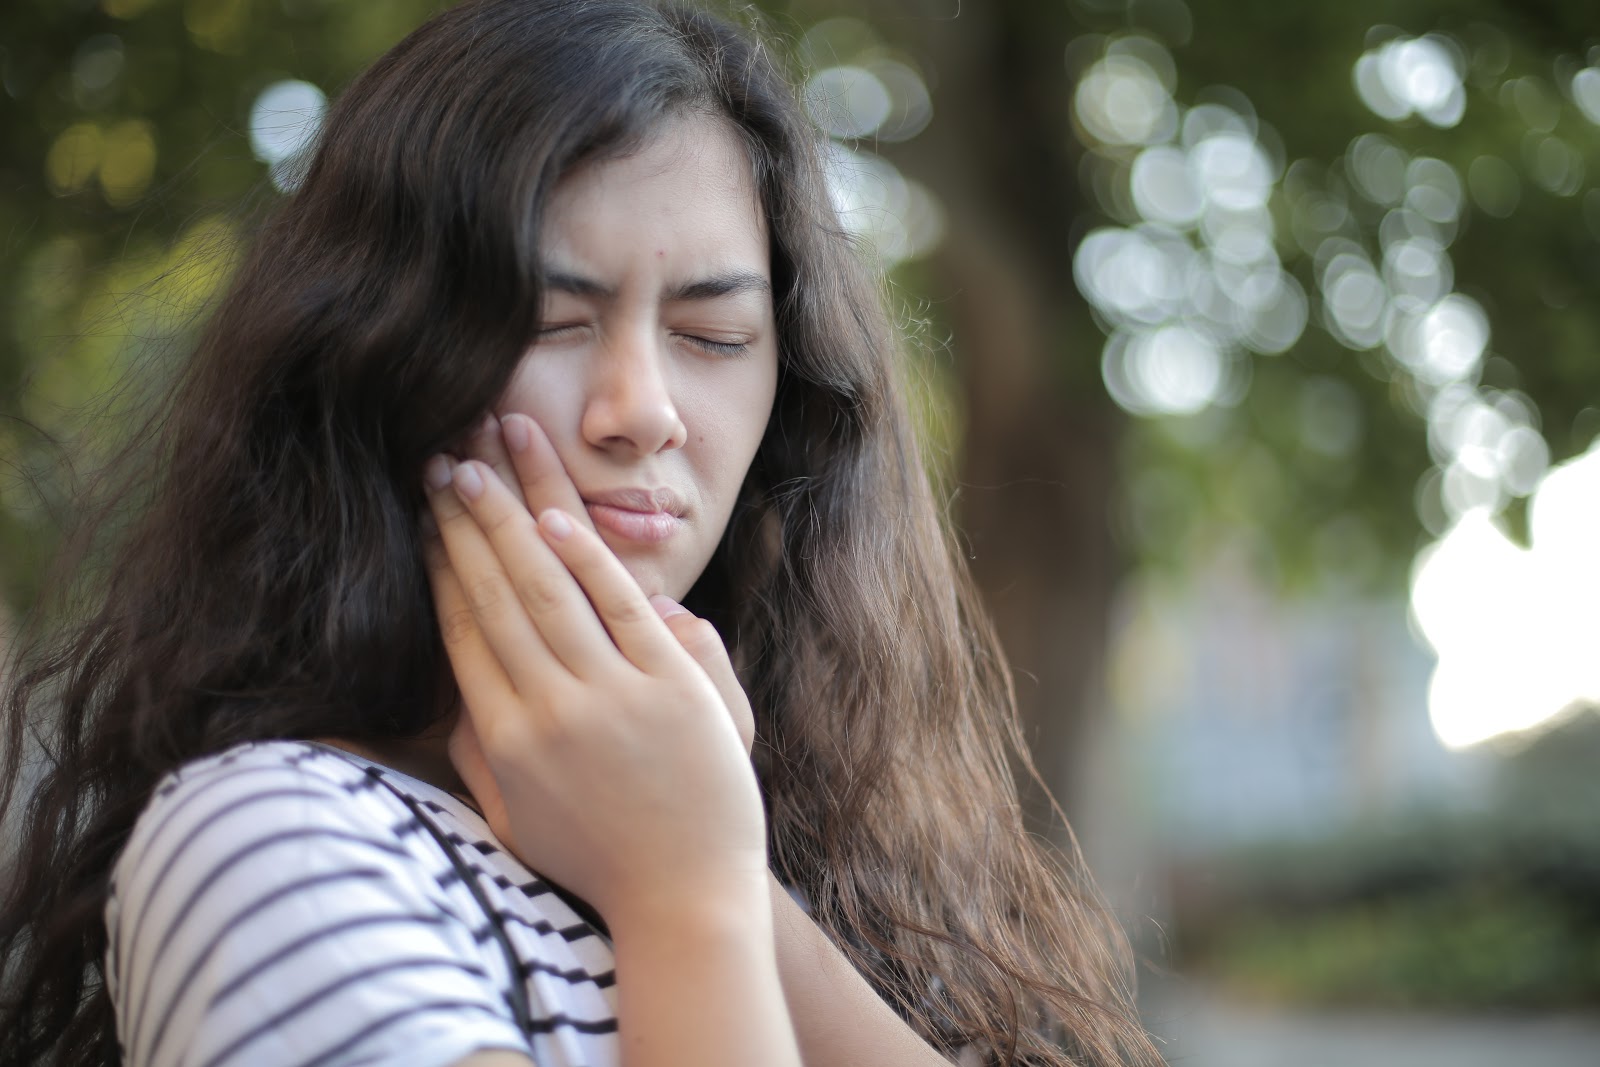 Eleven (11) ways to stop a toothache quickly